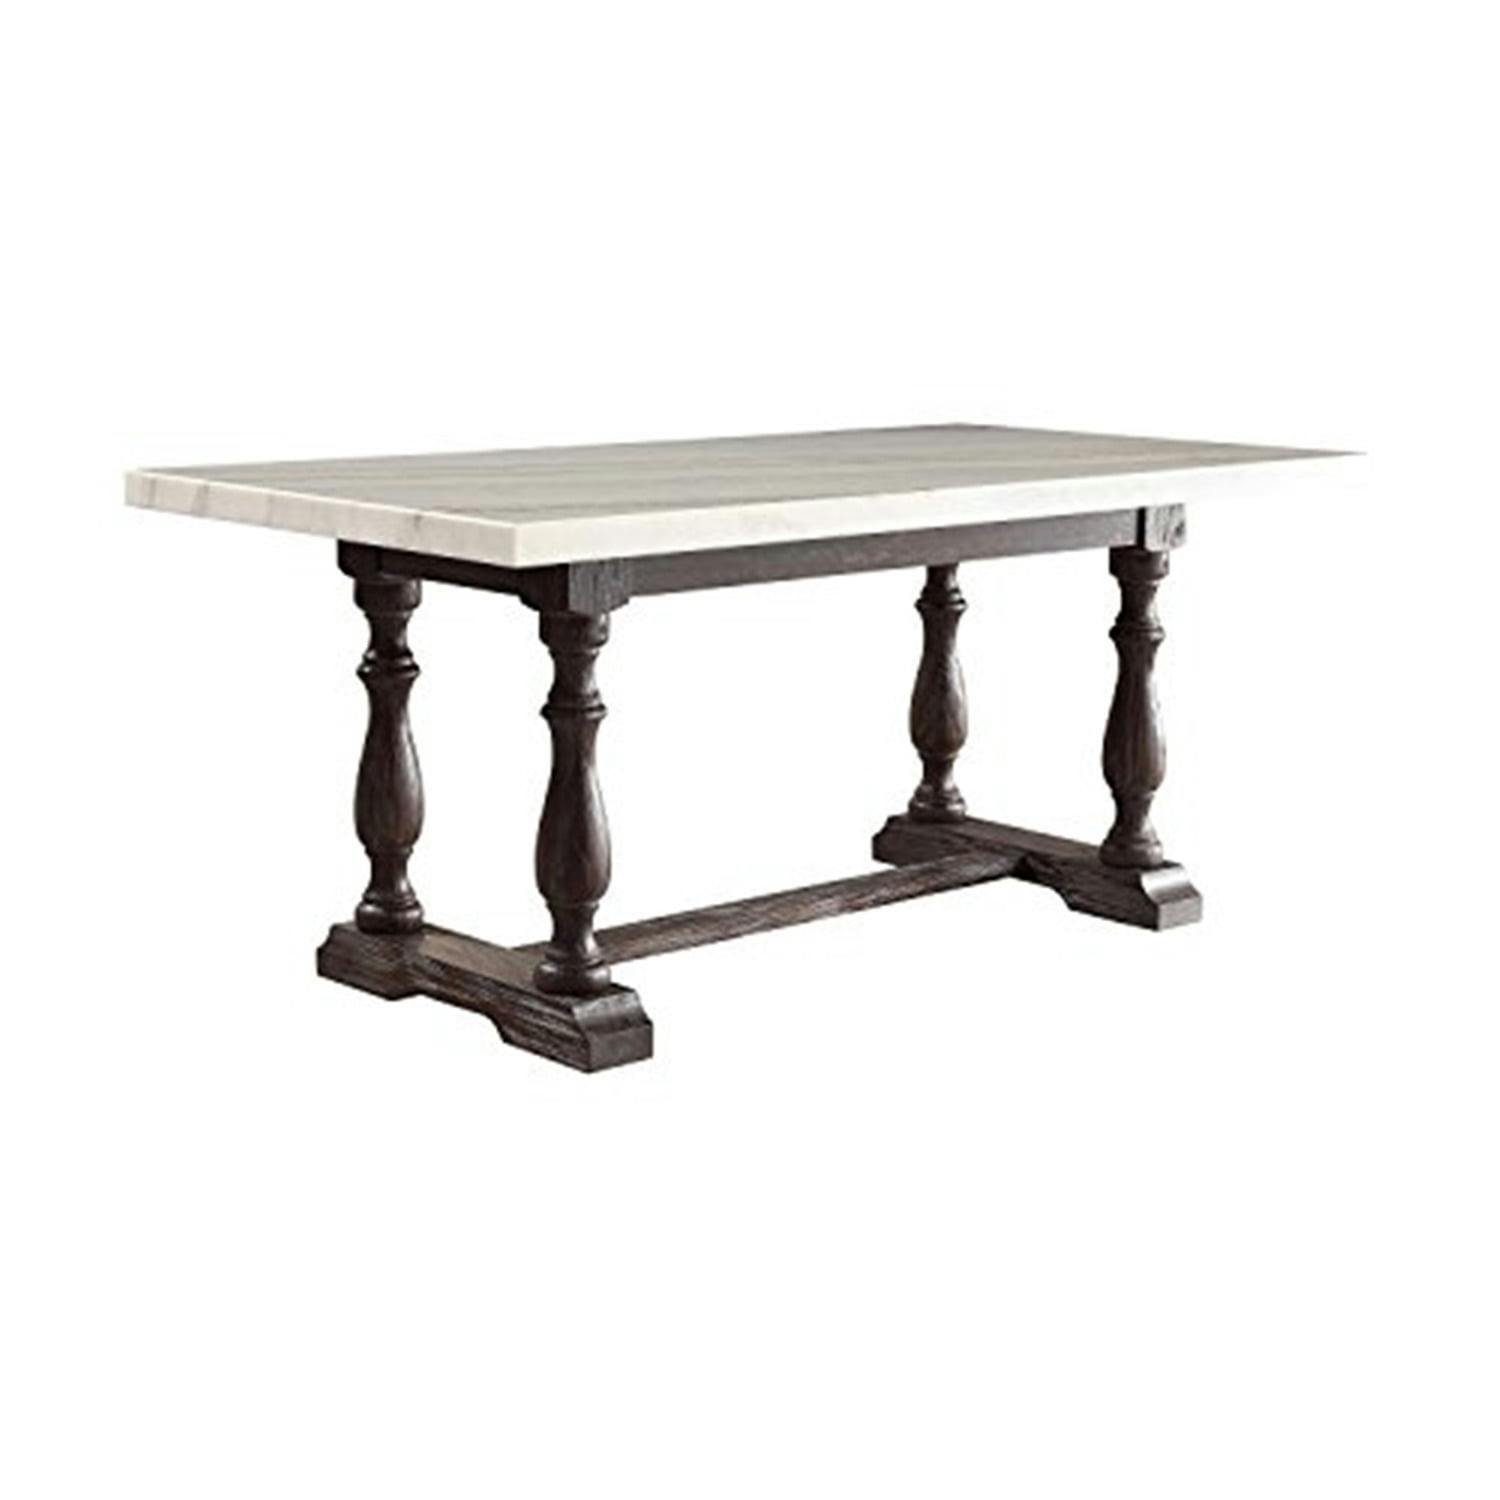 Espresso Elegance Rectangular Dining Table with White Marble Top